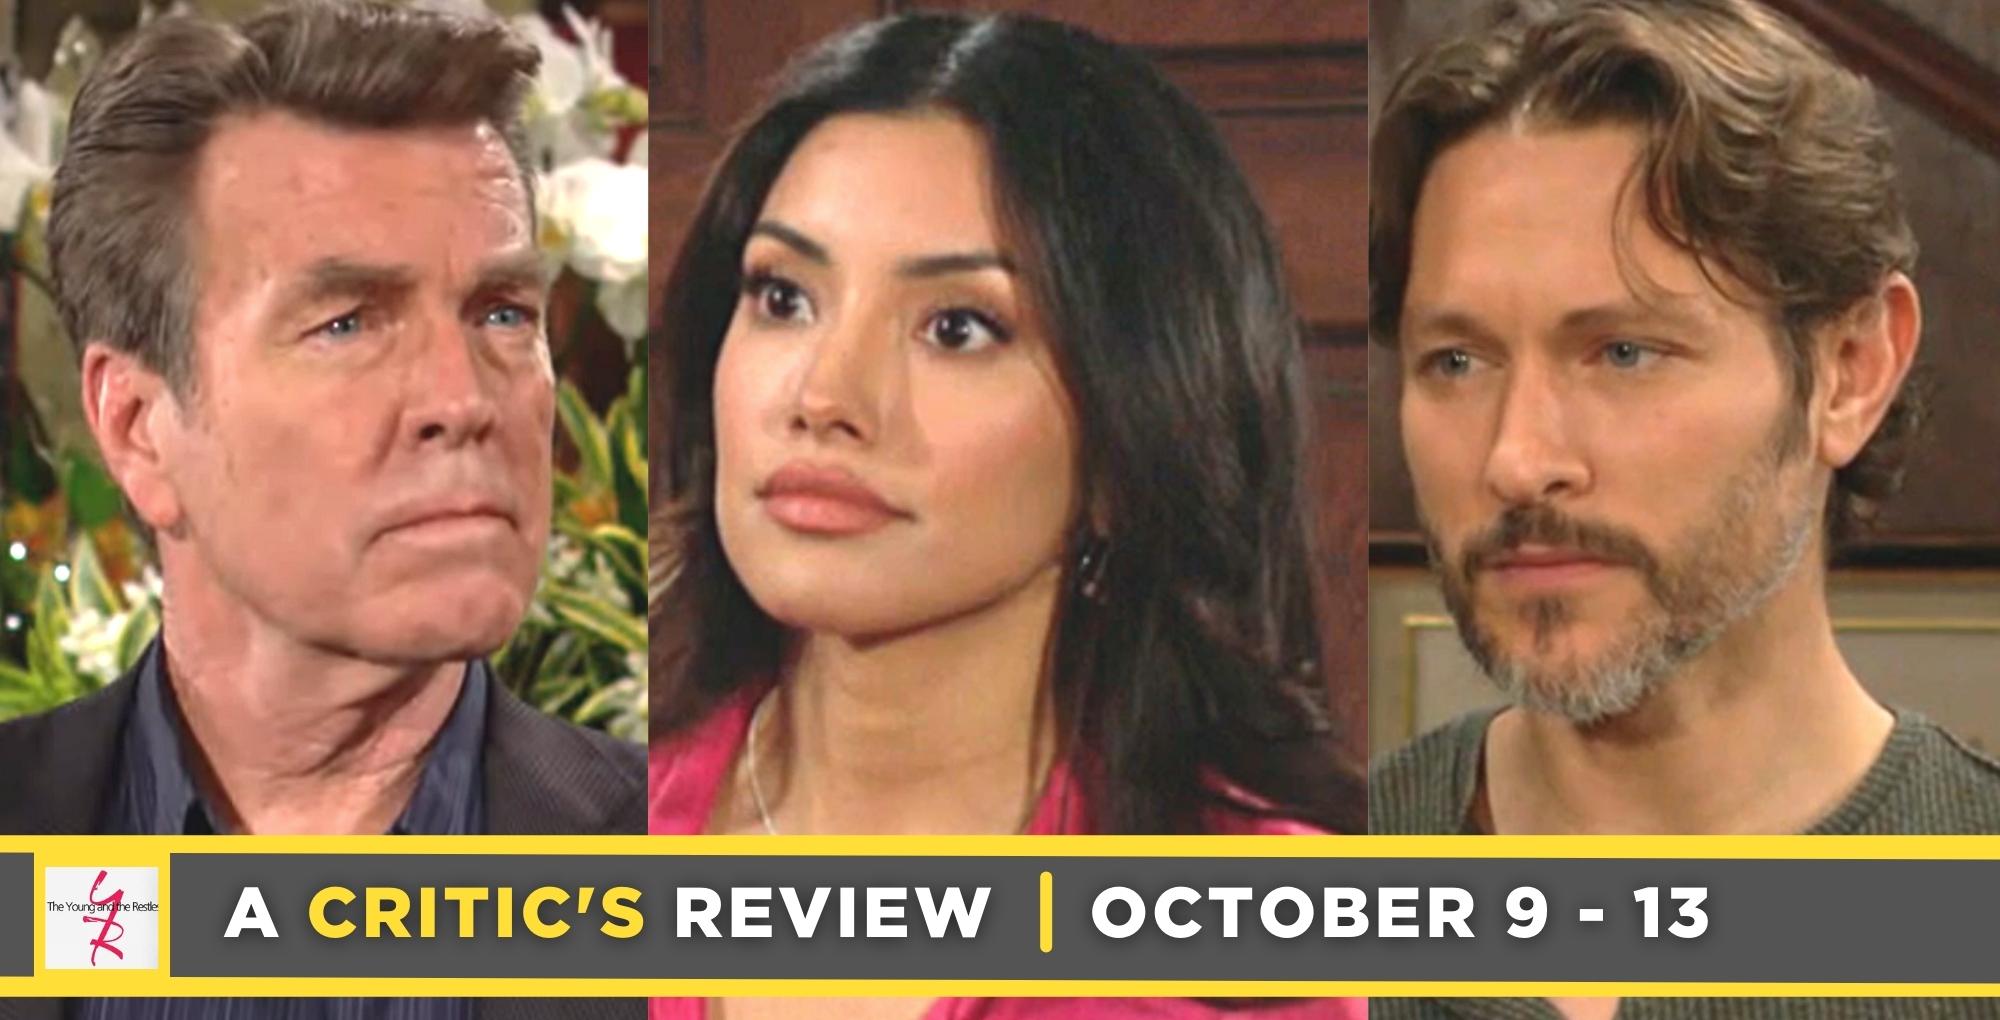 the young and the restless critic's review for october 9 – october 13, 2023, three images, jack, audra, and daniel.